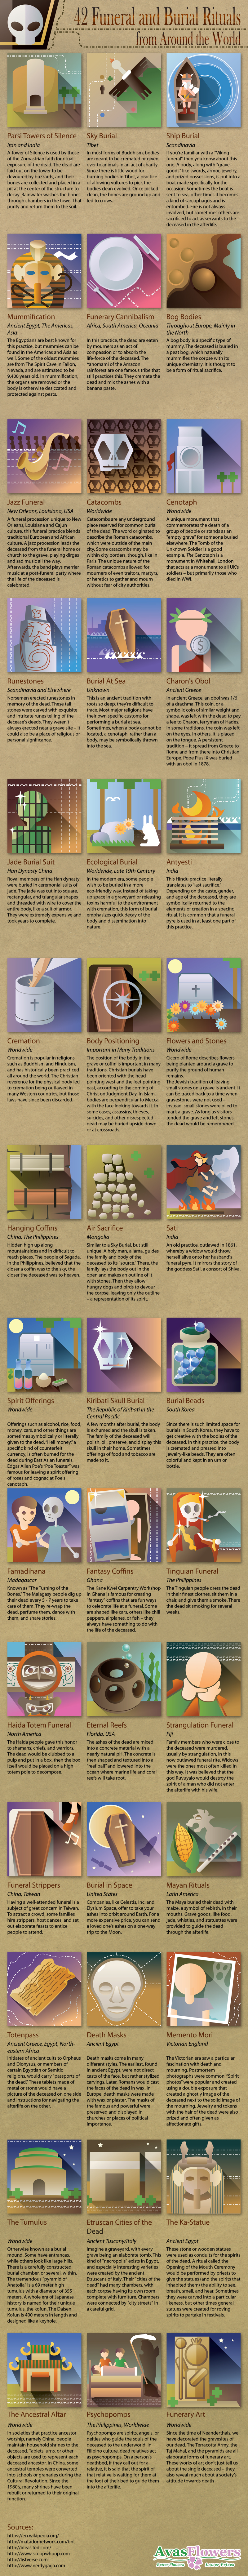 Rites and Rituals of Burial: 42 Examples from Around the World - Infographic